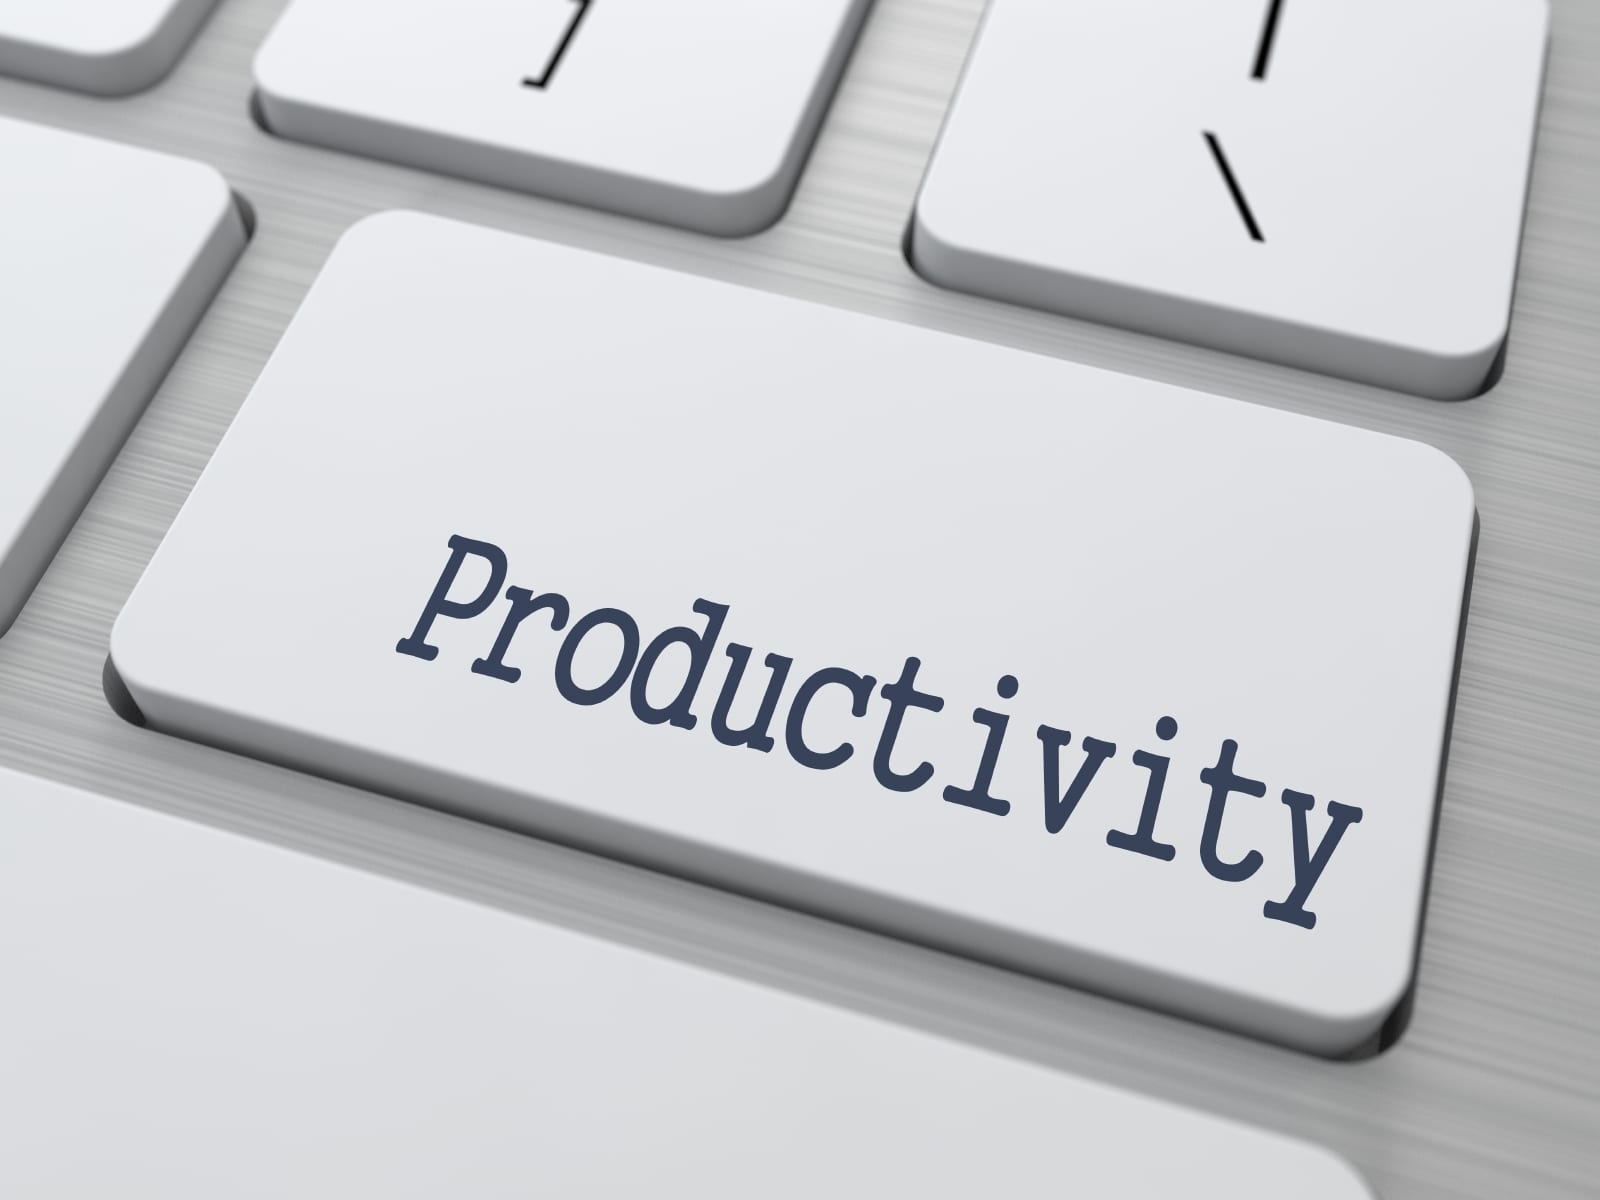 The Real Productivity Killer (It’s not what you think it is.)